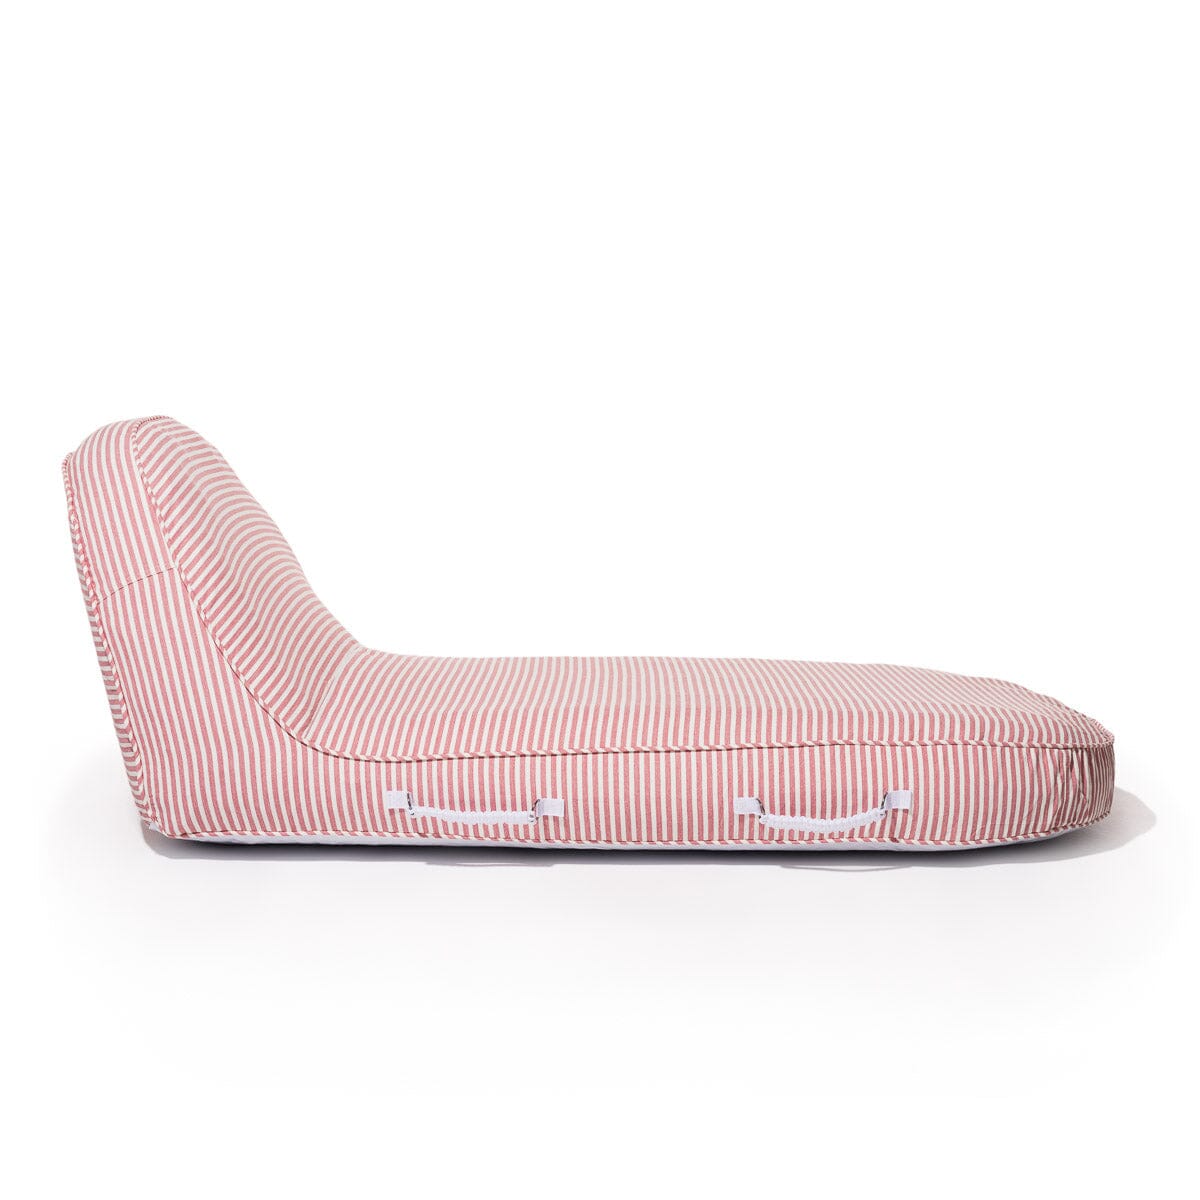 The Pool Lounger - Lauren's Pink Stripe Pool Lounger Business & Pleasure Co 